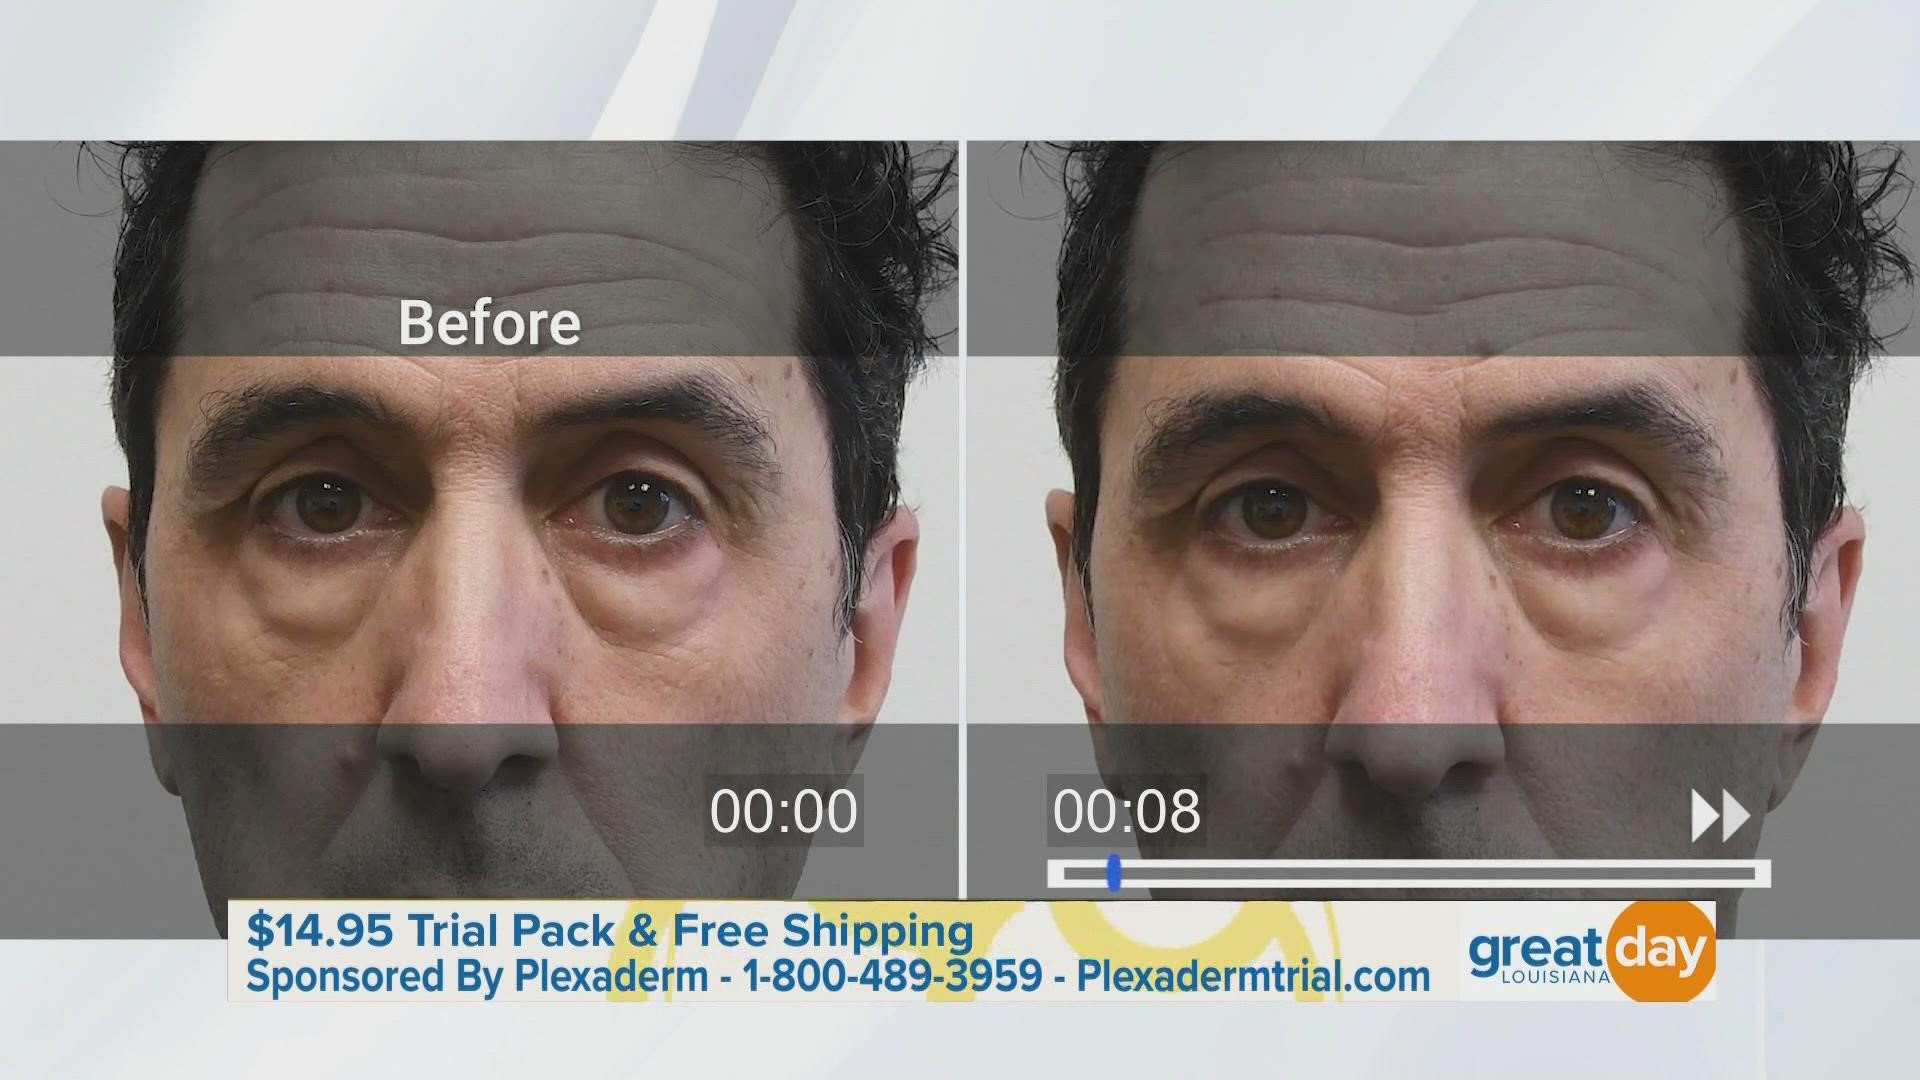 Plexaderm can help reduce the key signs of aging. Go to Plexadermtrial.com or call 1-800-489-5939 for your $14.95 trial pack + free shipping.